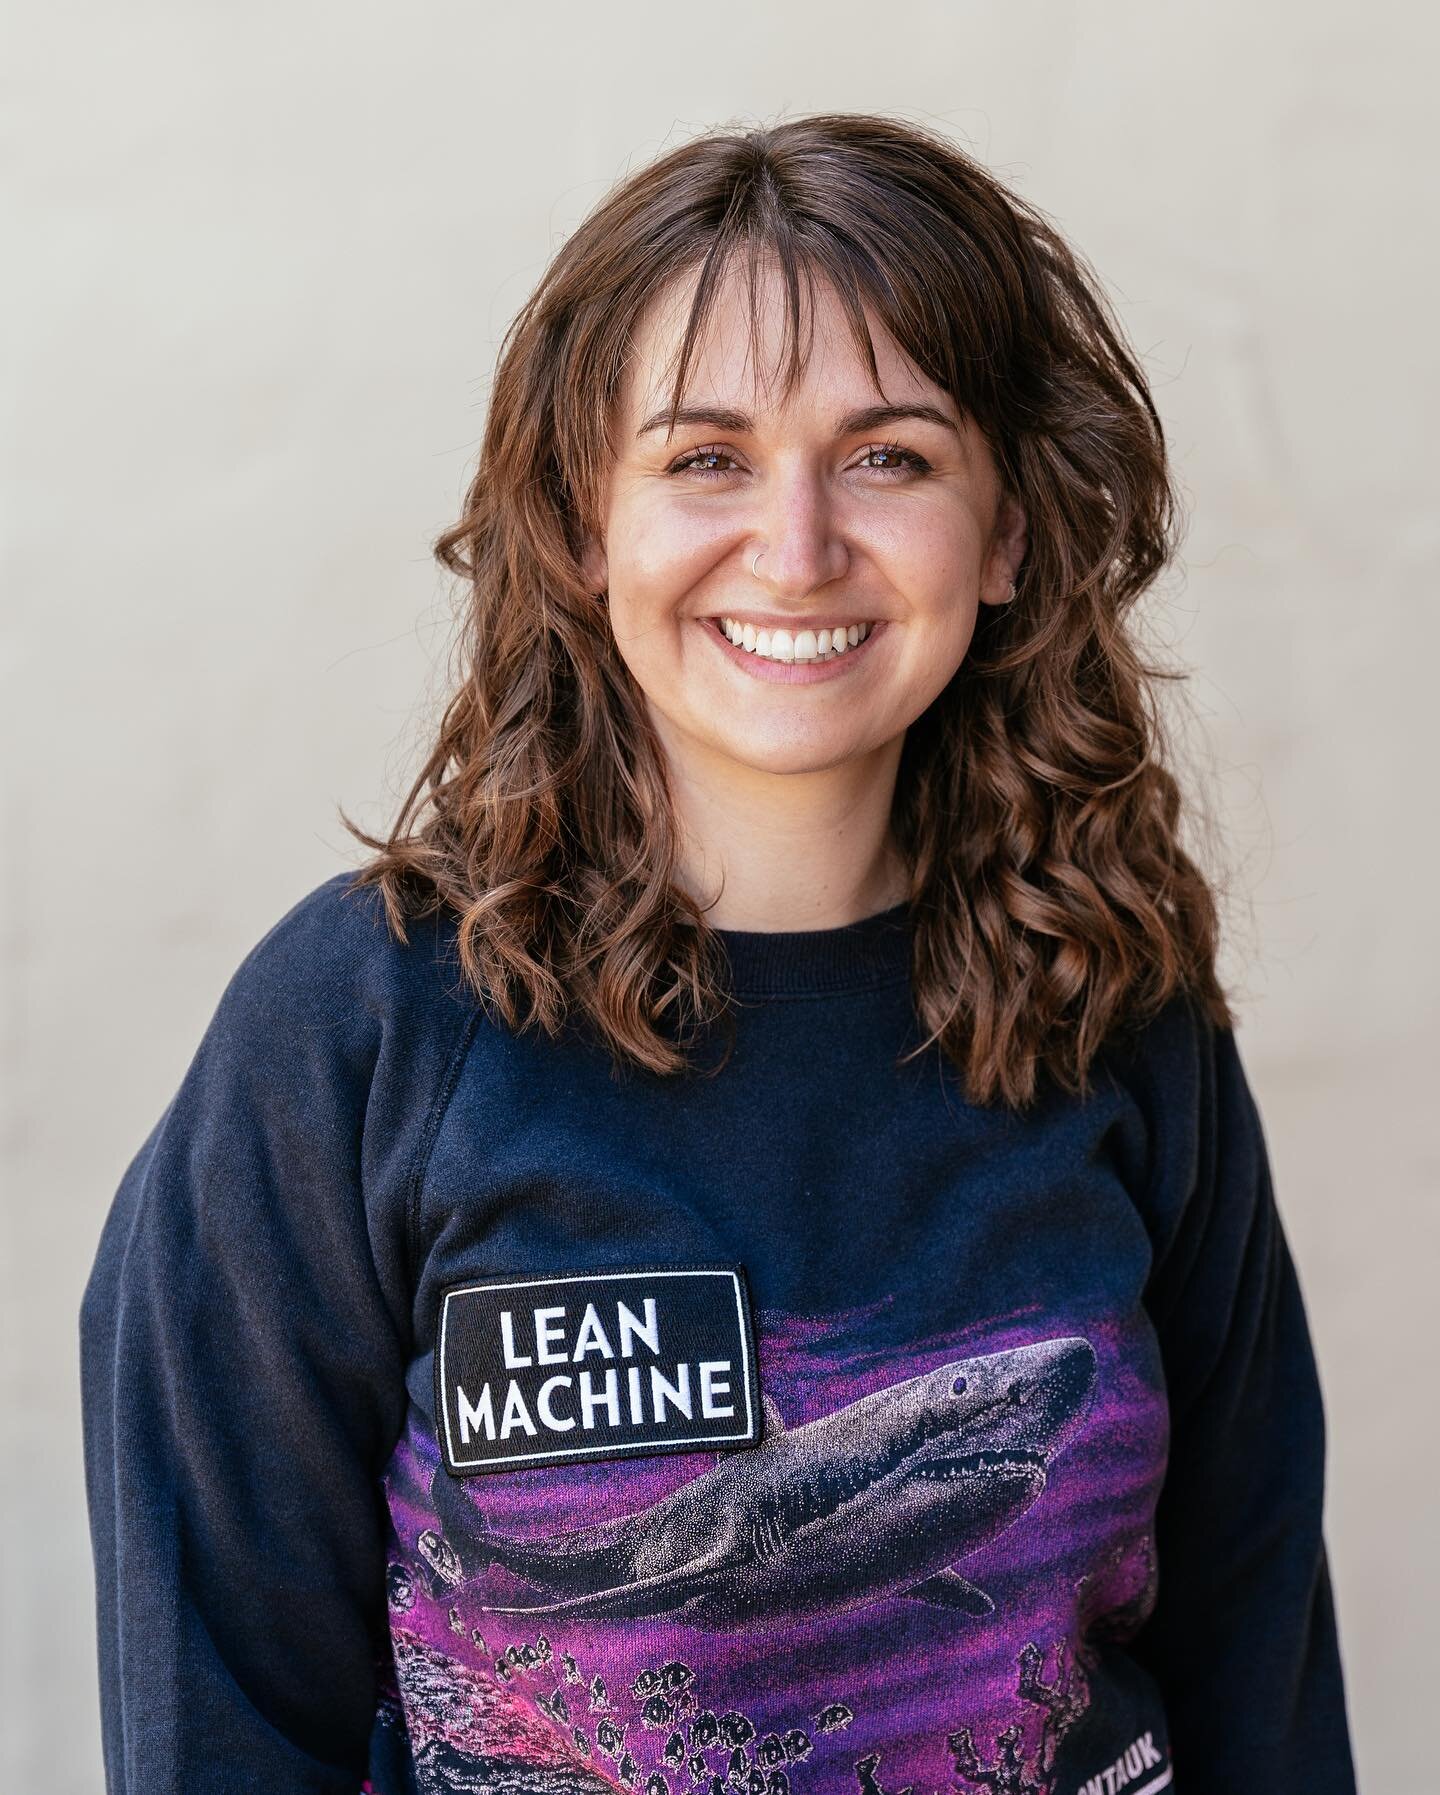 Welcome to Lean Machine  @kari_charlie!! Kari has a Masters from the Stark Program at USC and we are so pleased to have her join us! Welcome to the team! ⚙️